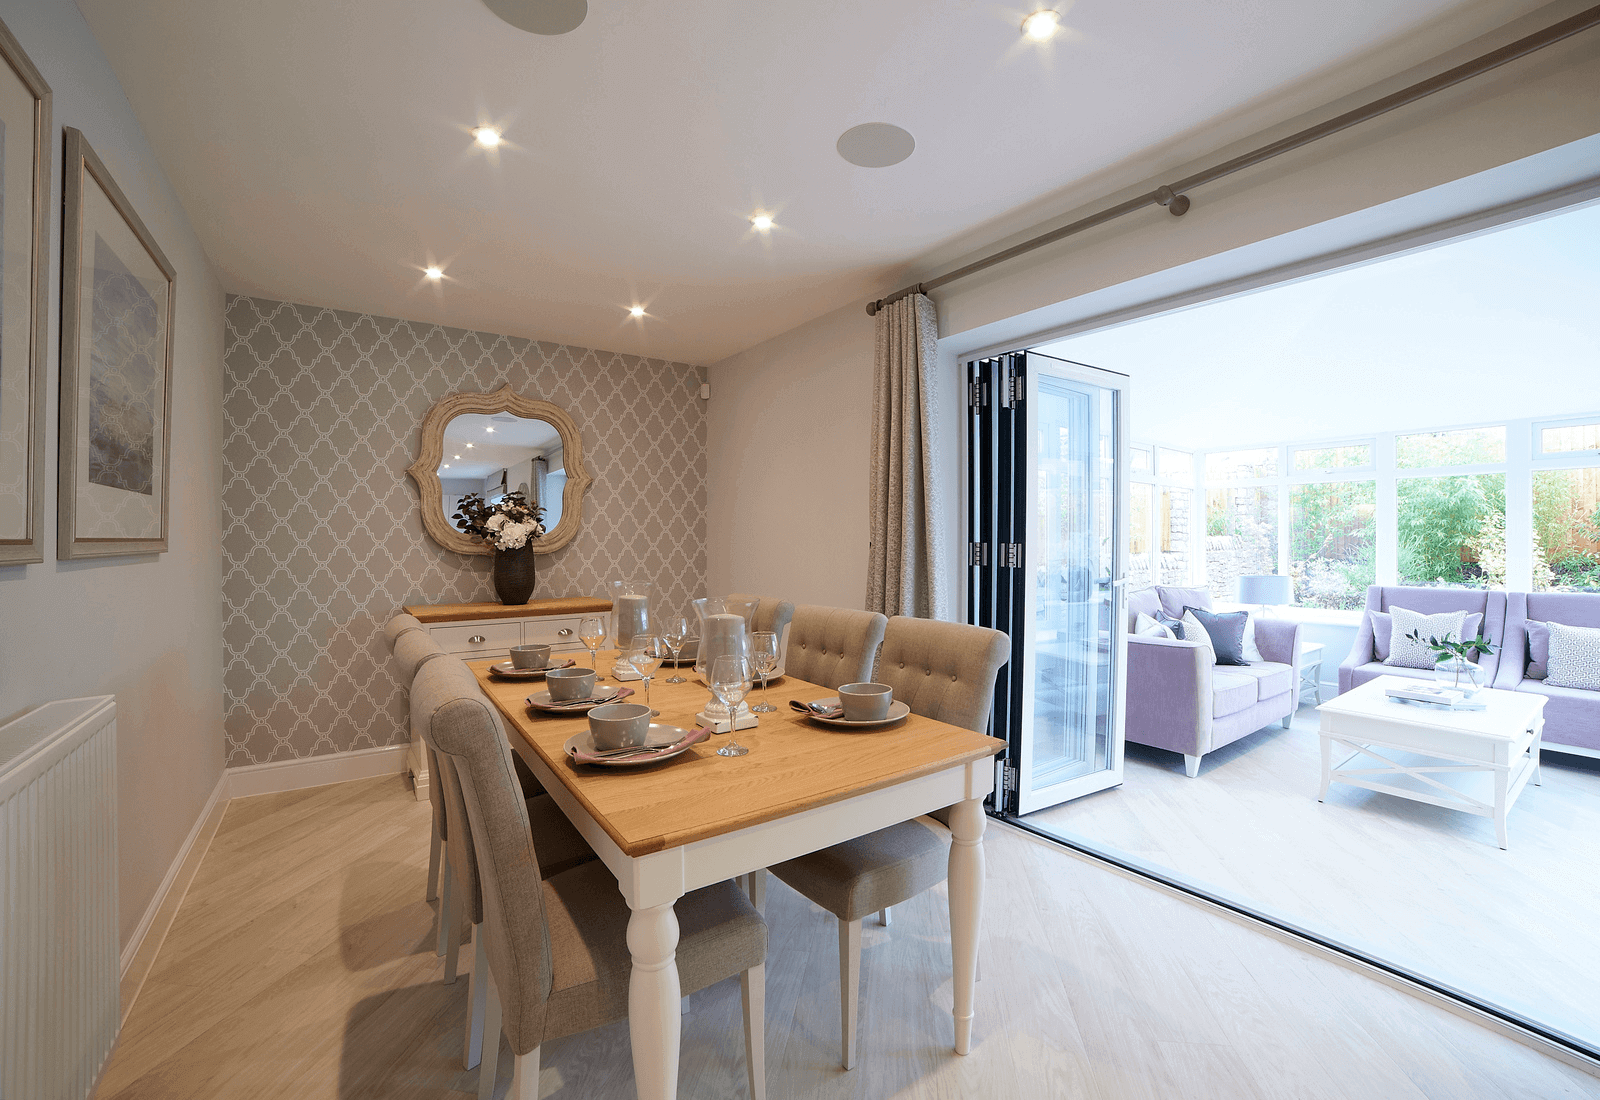 Dining Room in a Hollin Show Home